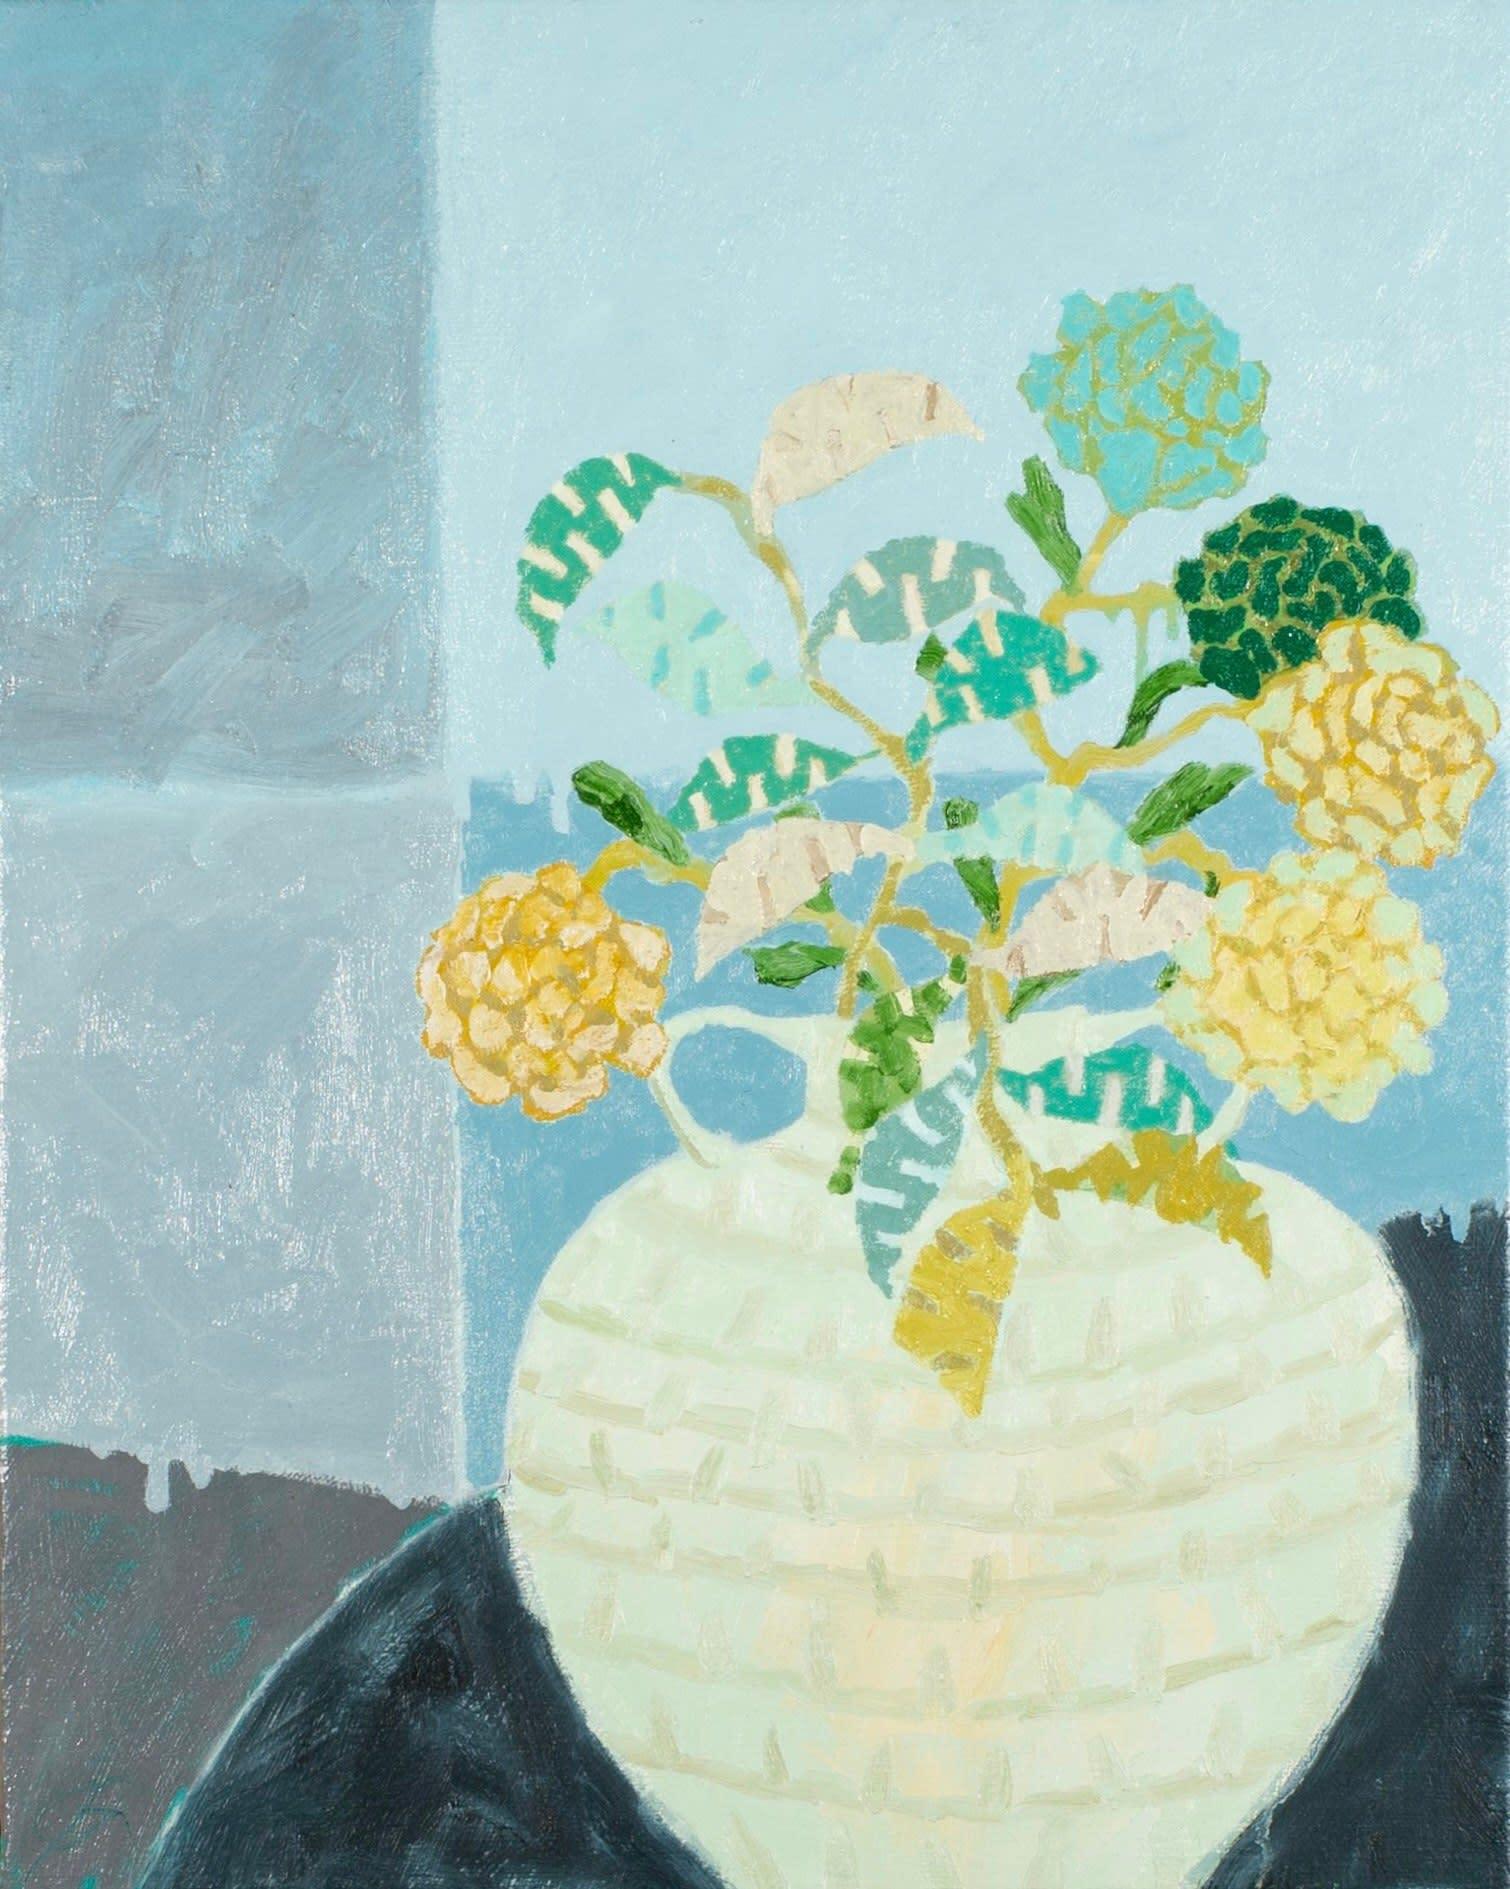 Still life, Blue, Yellow, Grey - Oil Painting by Richard Ballinger B. 1957, 2023

Additional information:
Medium: Oil on canvas
Dimensions: 50 x 40 cm
19 3/4 x 15 3/4 in
Signed, titled and dated verso

Richard Ballinger is a British landscape and